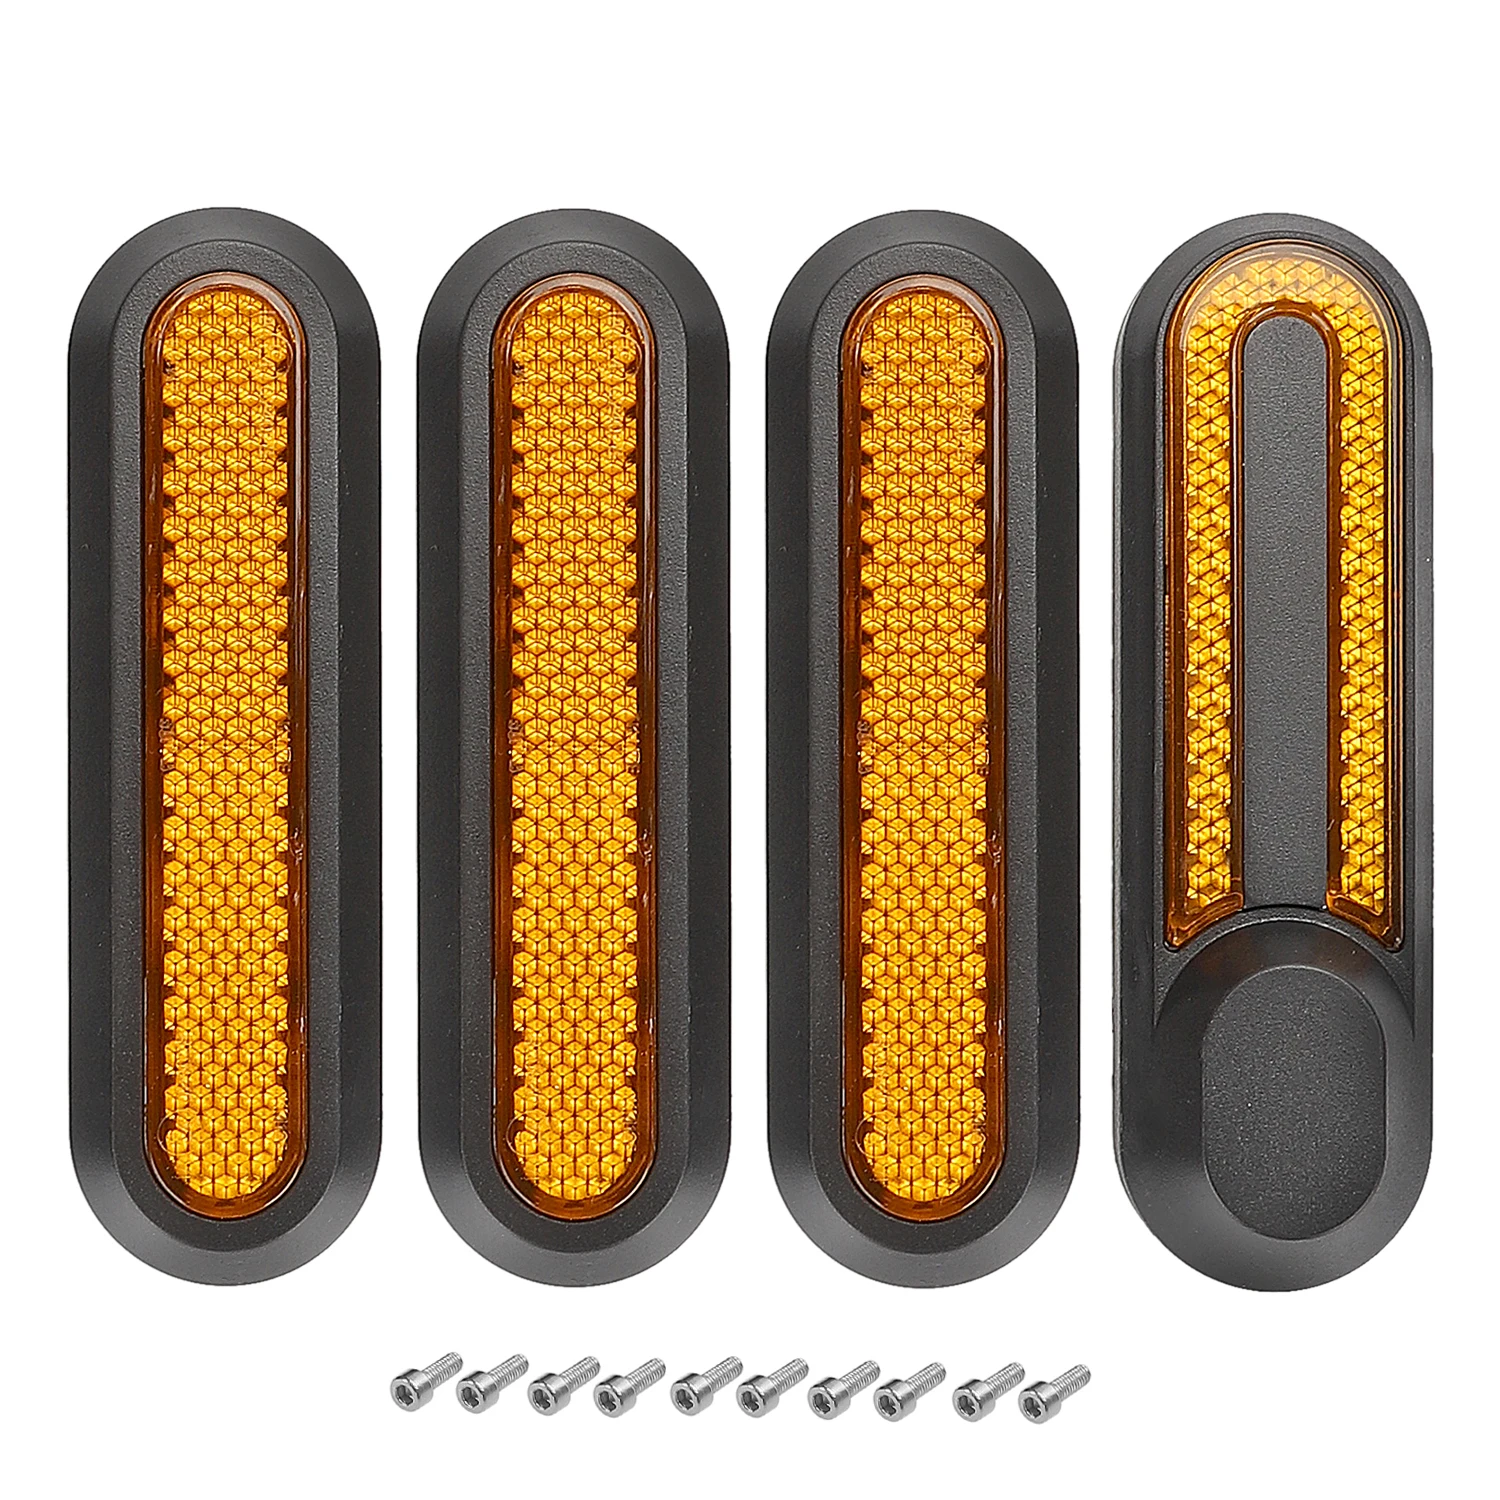 

4 Pcs Yellow Refitting Decorative Shells and Reflector Bars With 10 Screws Xiaomi Mijia M365/1S/Pro/Pro2/Lite Electric Scooter